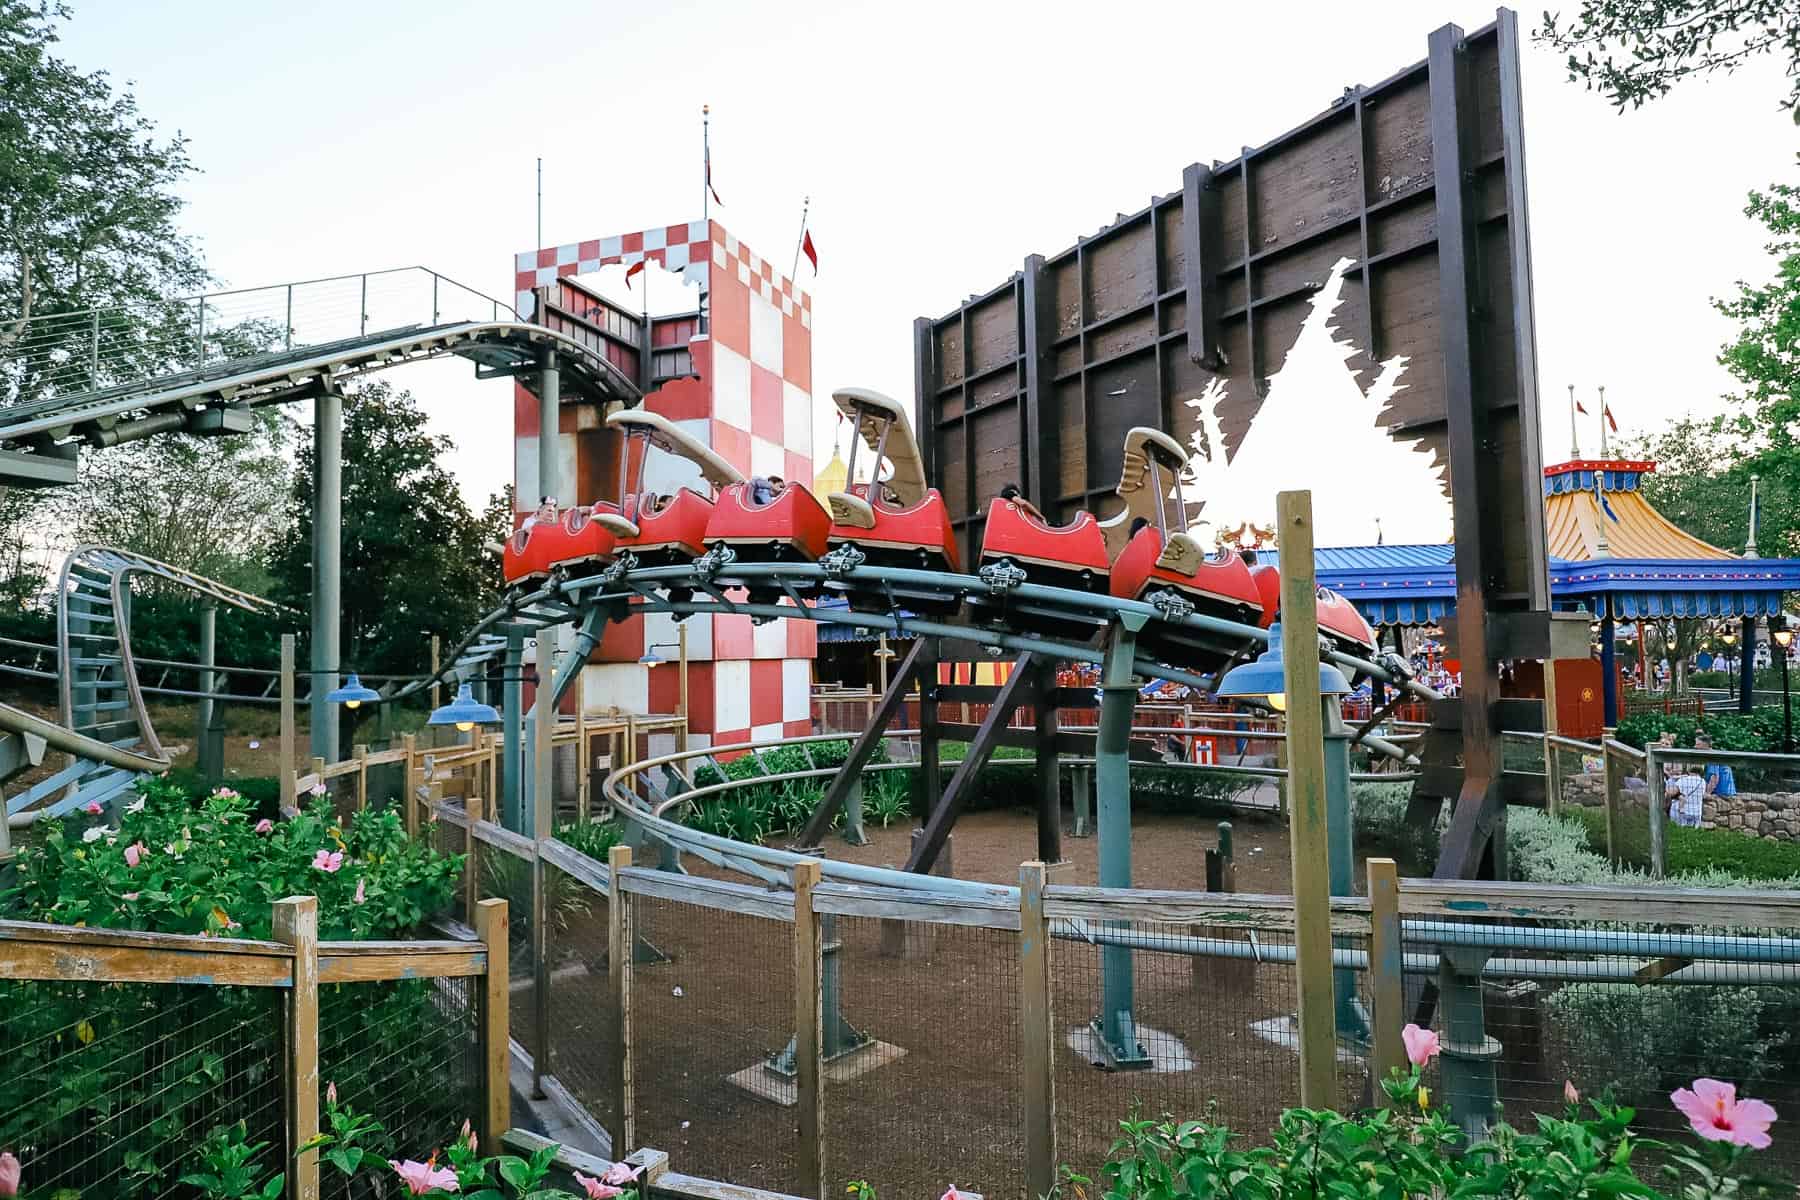 The coaster flying along the tracks as it goes through the billboard. 